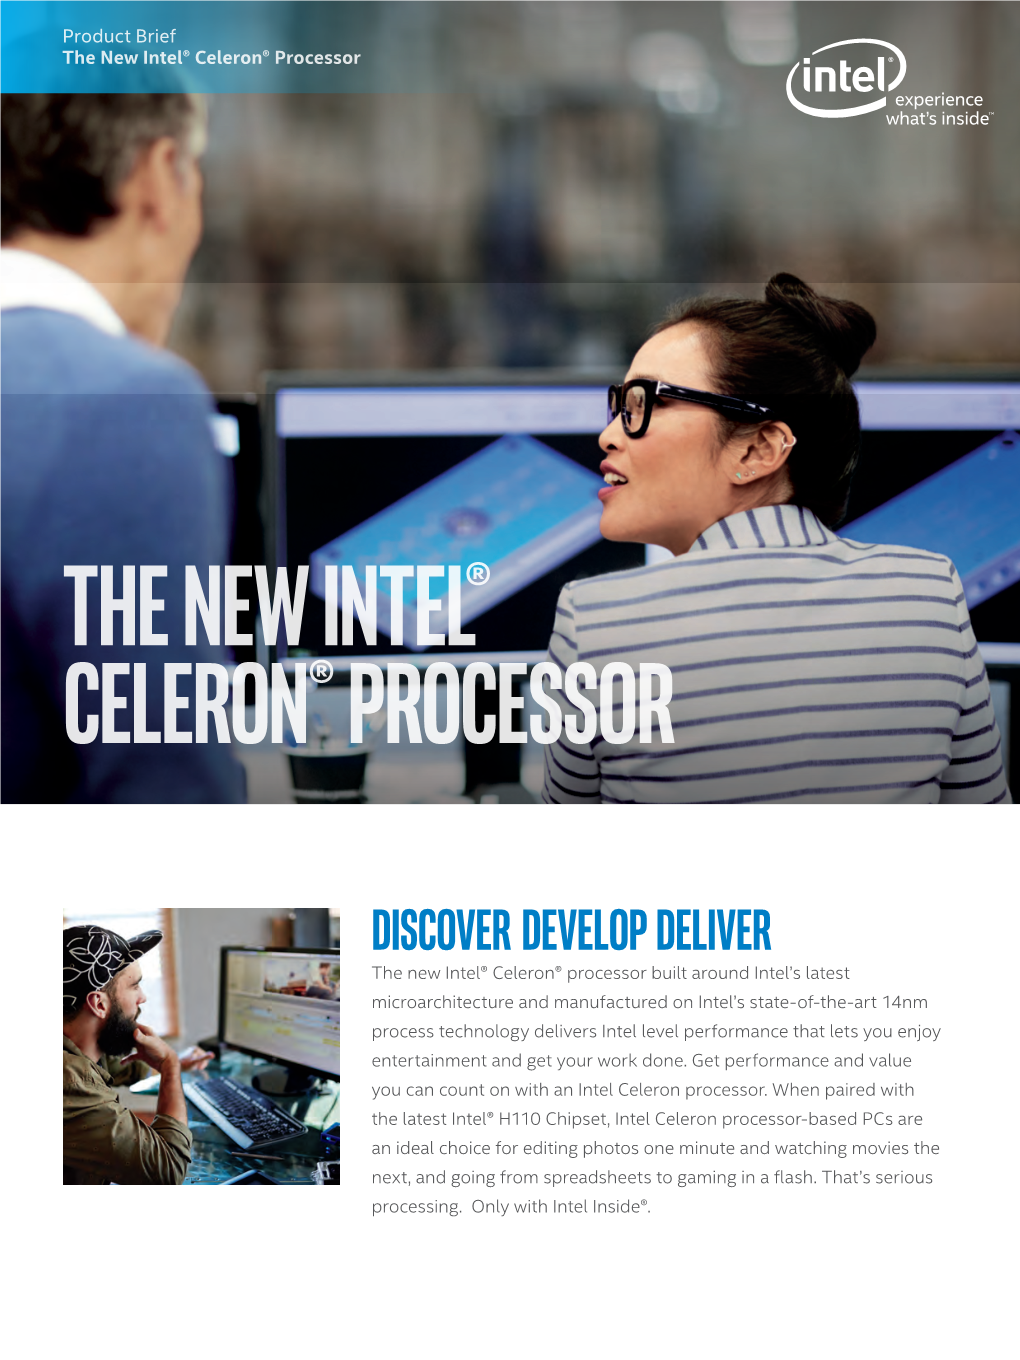 Discover, Develop, Deliver with the New Intel® Celeron® Processor